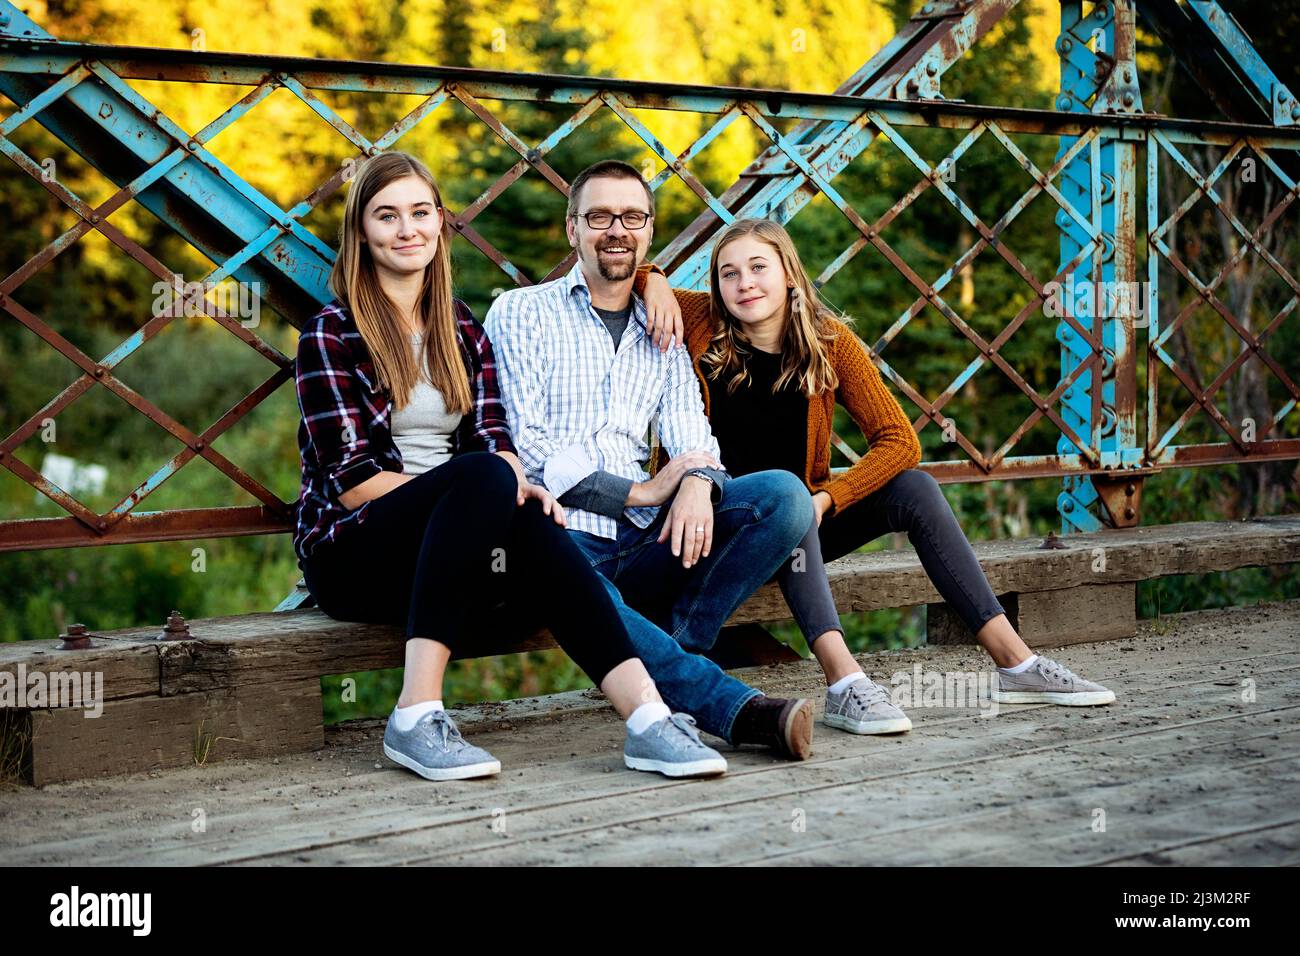 Outdoor portrait of a father with two teenage daughters sitting on a bridge in a city park in autumn; Edmonton, Alberta, Canada Stock Photo